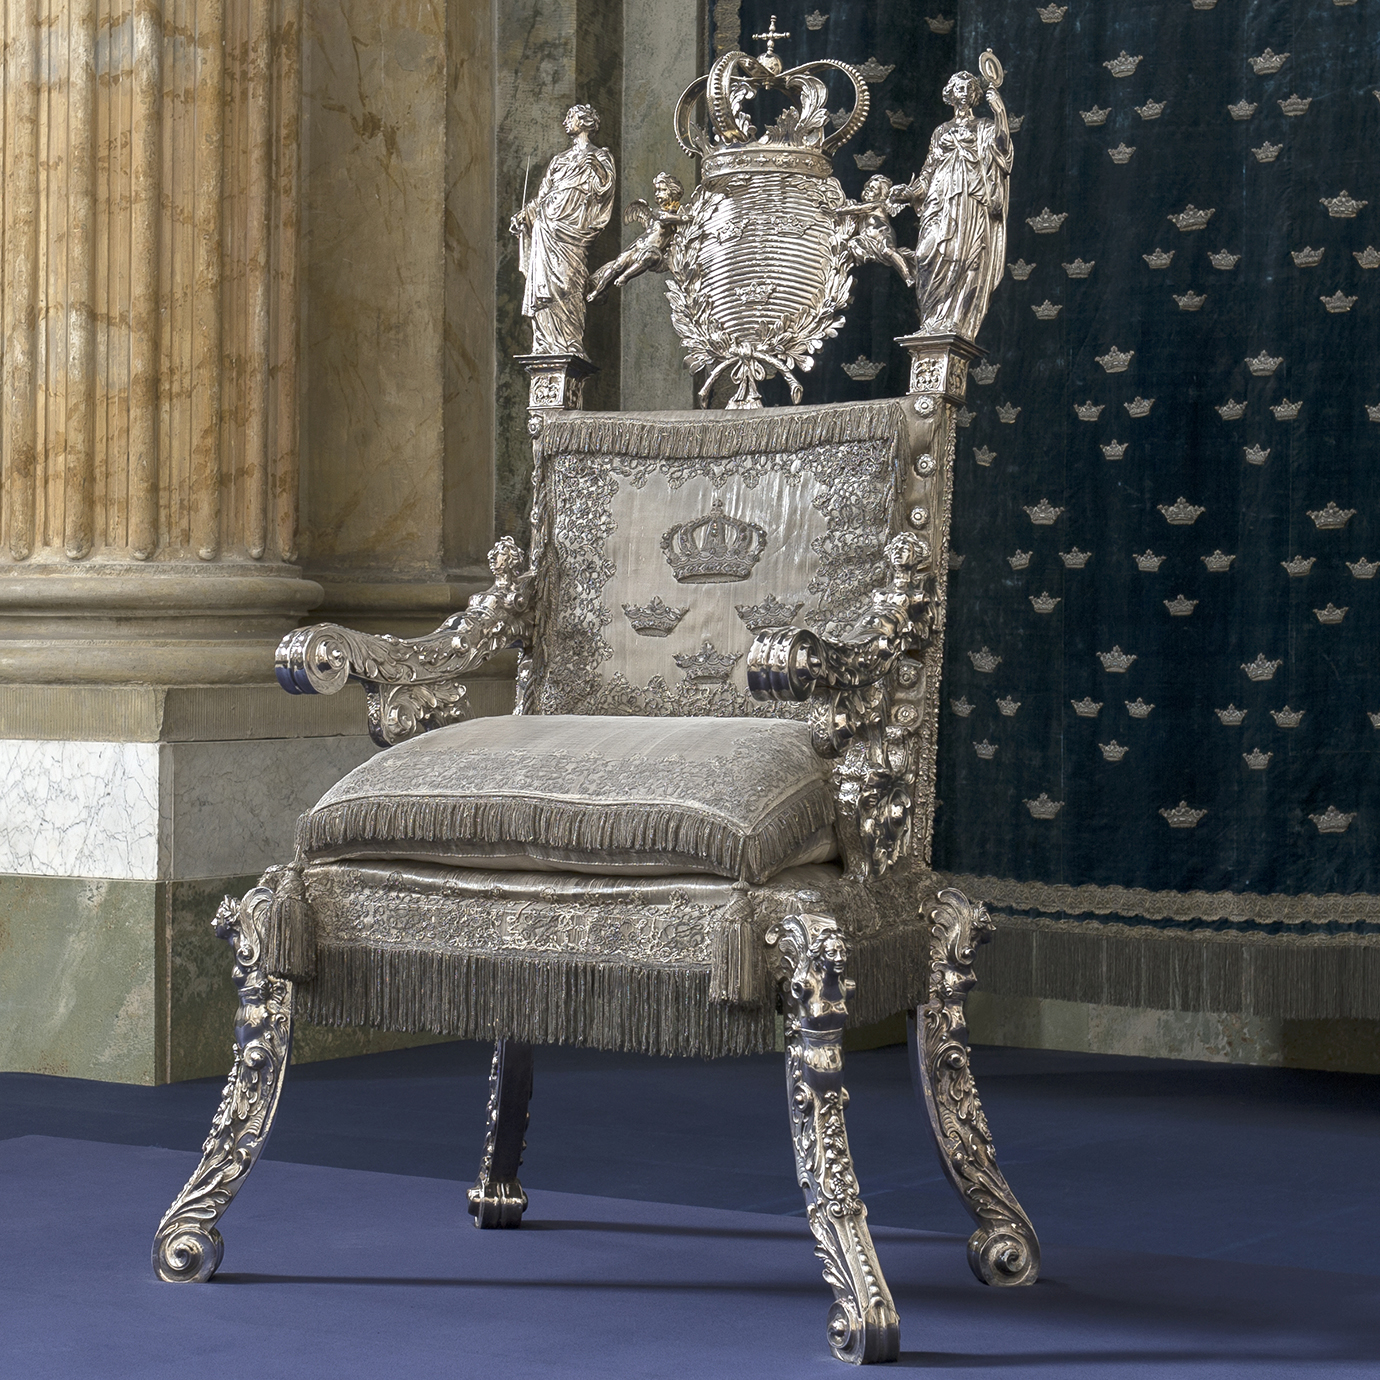 The last time the silver throne was used was in 1974, when the ceremonial Opening of the Parliamentary Session took place in the Hall of State at the Royal Palace for the last time. 